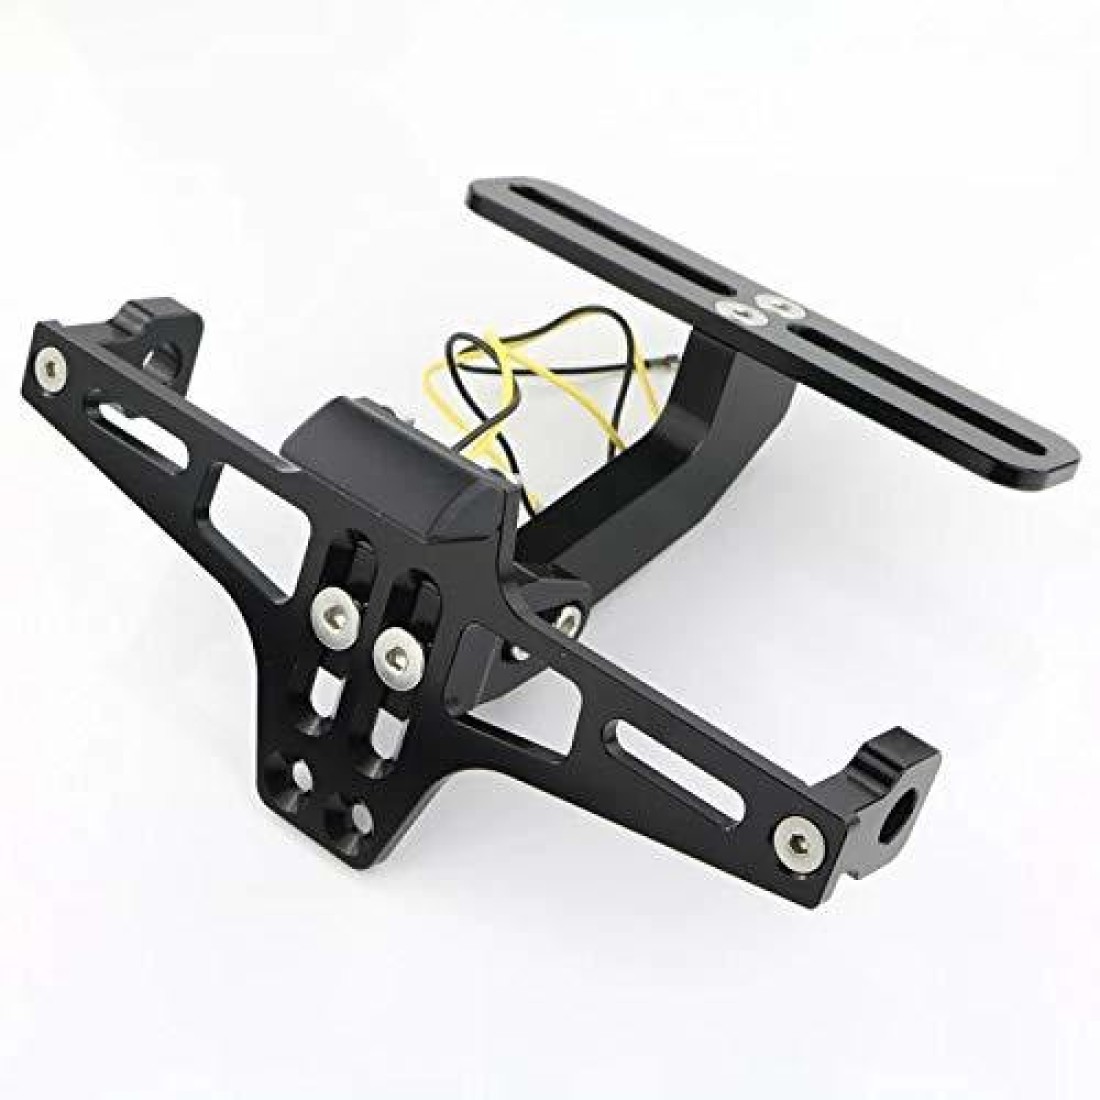 Cheap CNC Aluminum Alloy Motorcycle License Plate Holder Frame